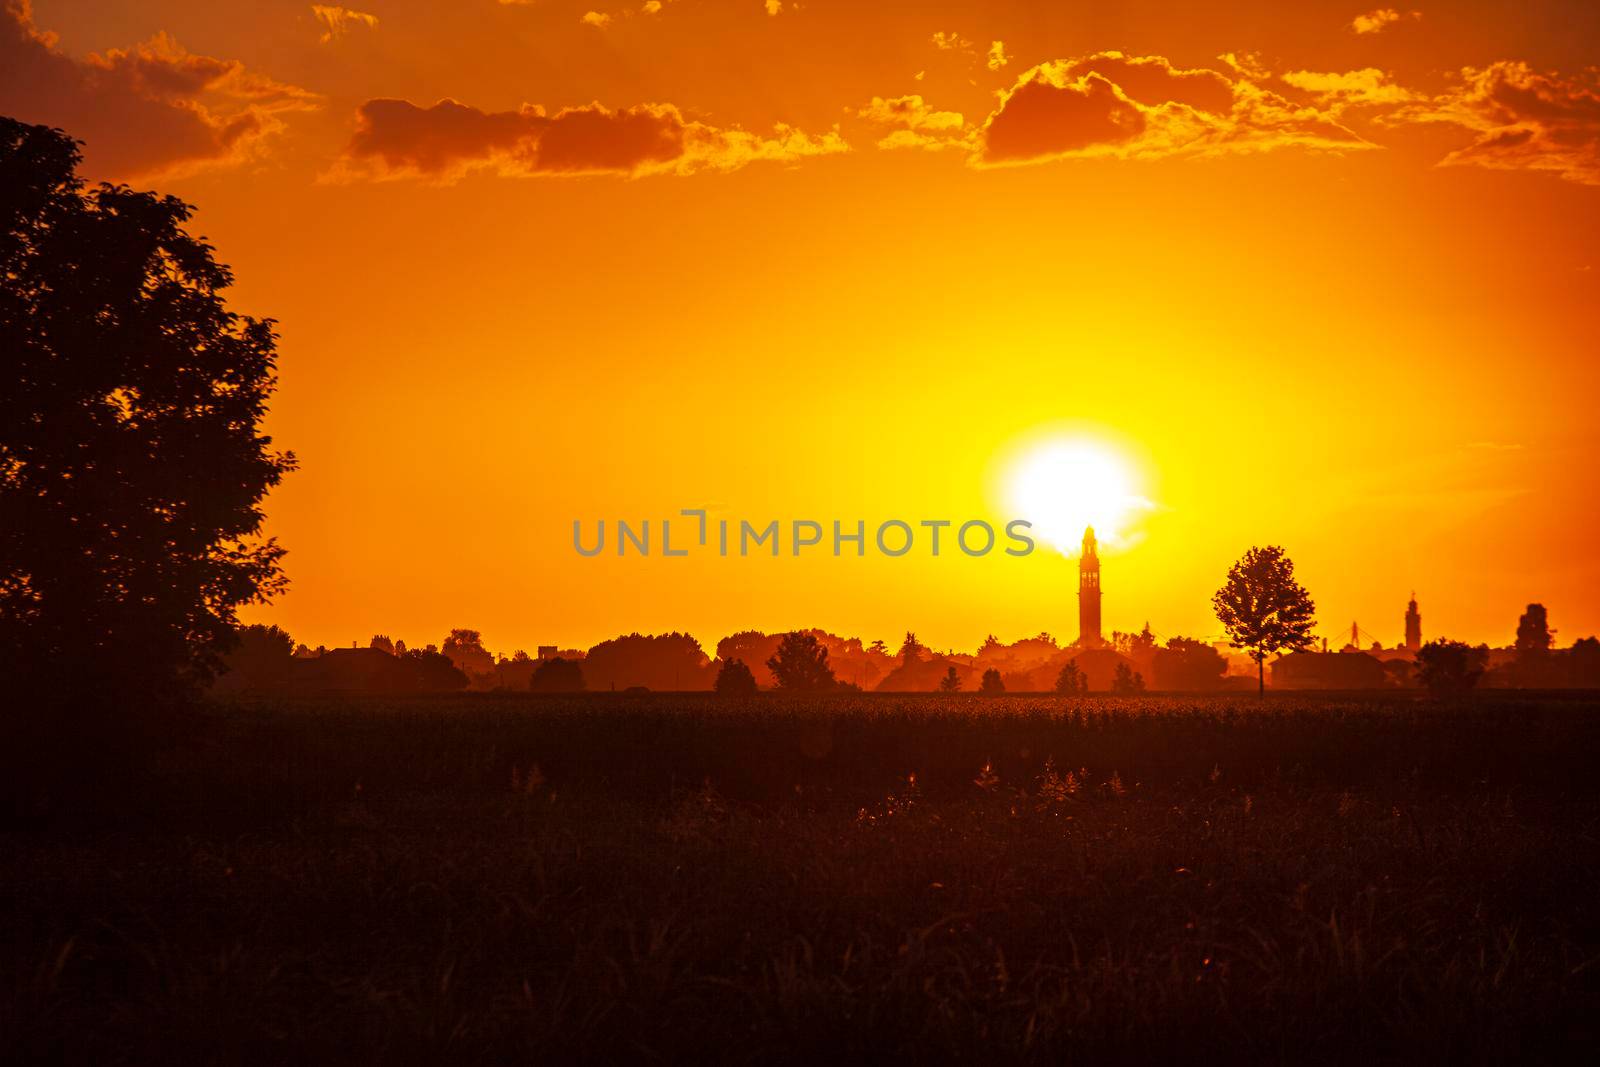 Sunset in a landscape with bell tower, trees and countryside